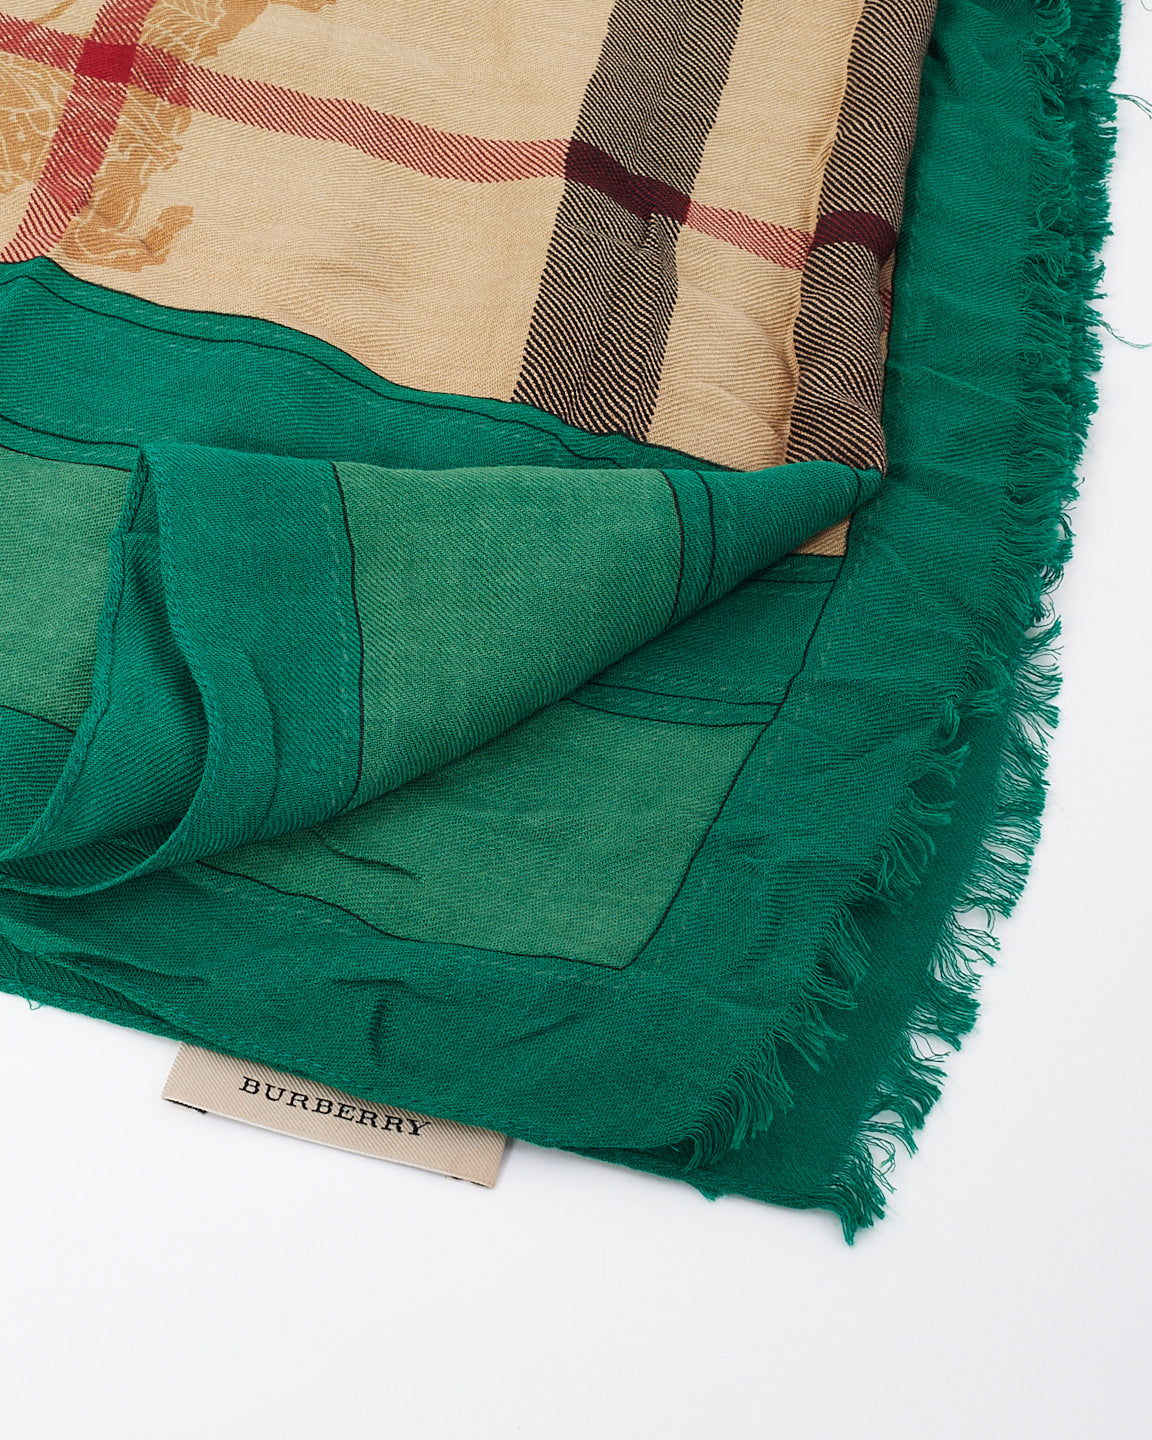 Burberry Beige & Green Check Print Cotton Scarf